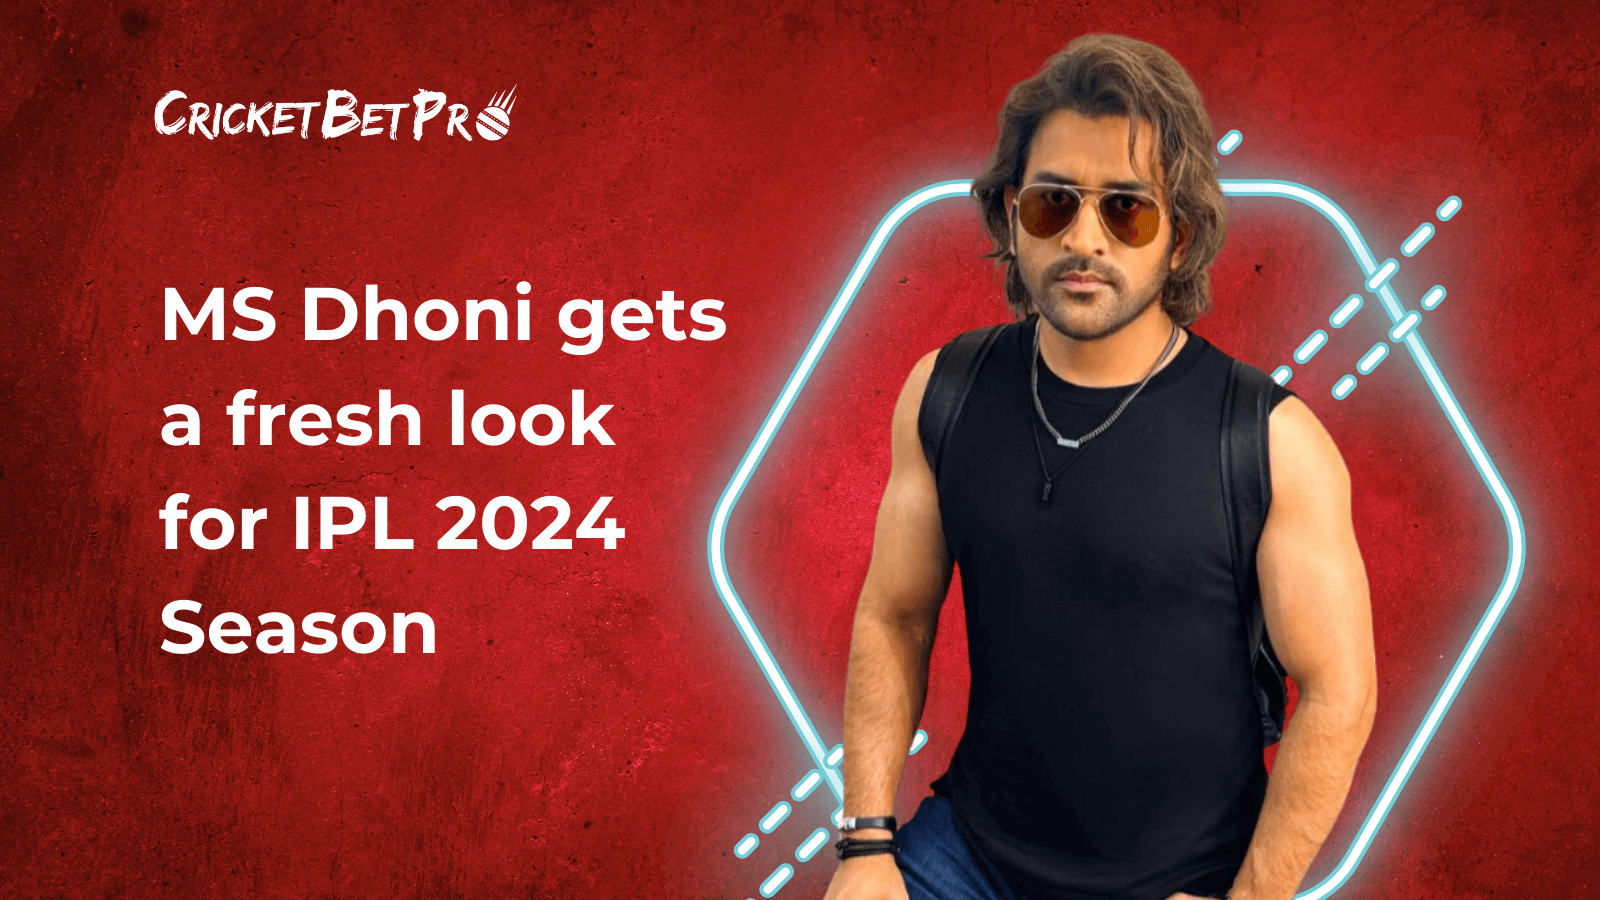 MS Dhoni gets a fresh look for IPL 2024 Season